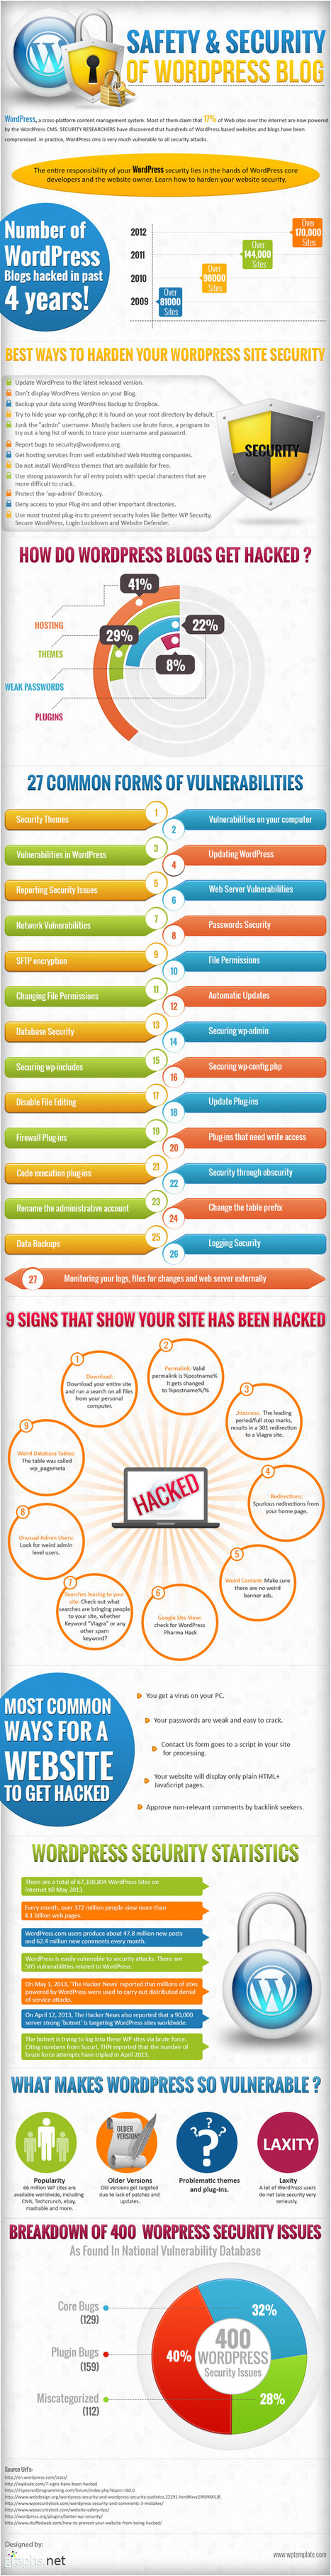 Safety and Security of WordPress Blog (Infographic) | Mon vrac : | Scoop.it